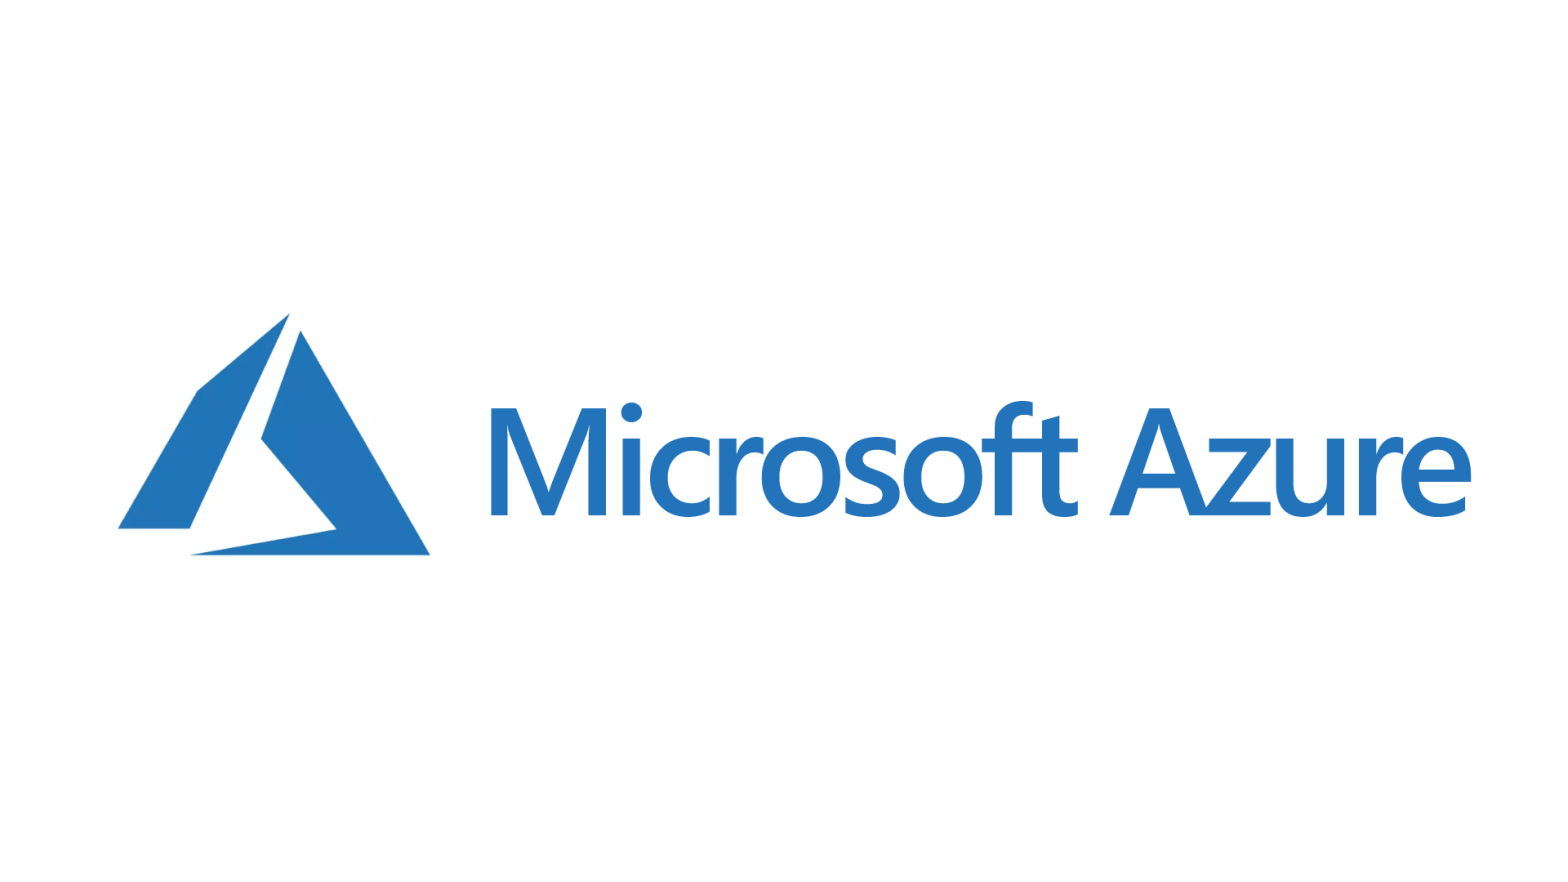 The Microsoft Azure logo which suffered an outage of the Office 365 Xbox Live and Teams services